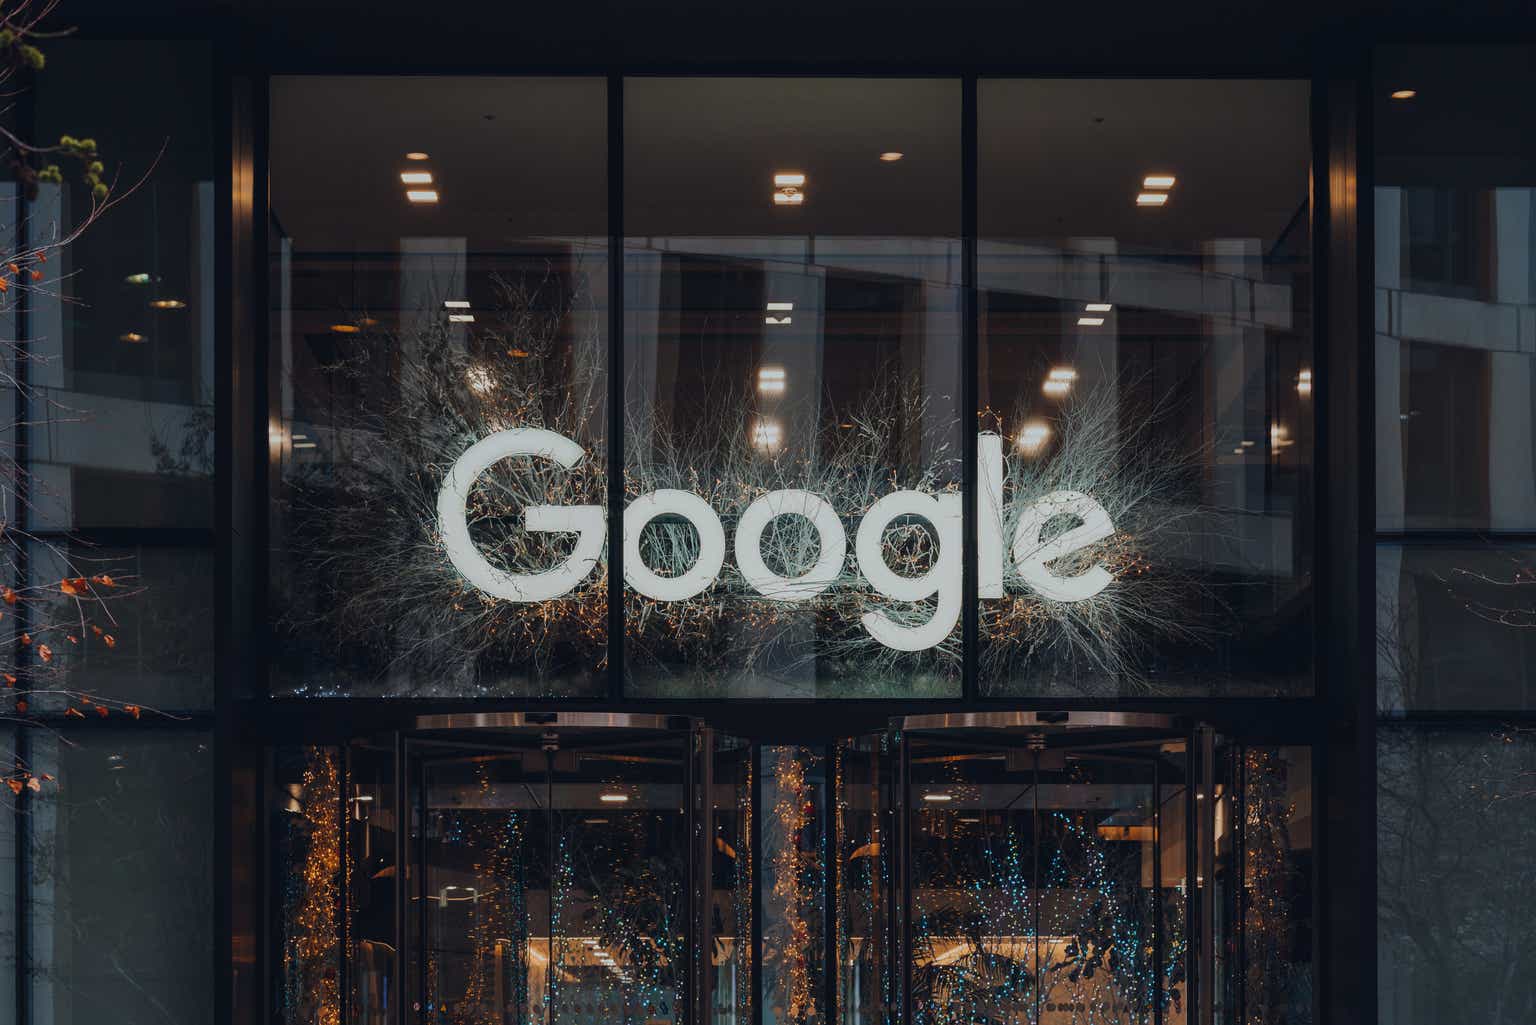 Recent earnings report by Alphabet (NASDAQ:GOOG ) led to a minor correction in the stock as its performance in many segments was below expectations. O